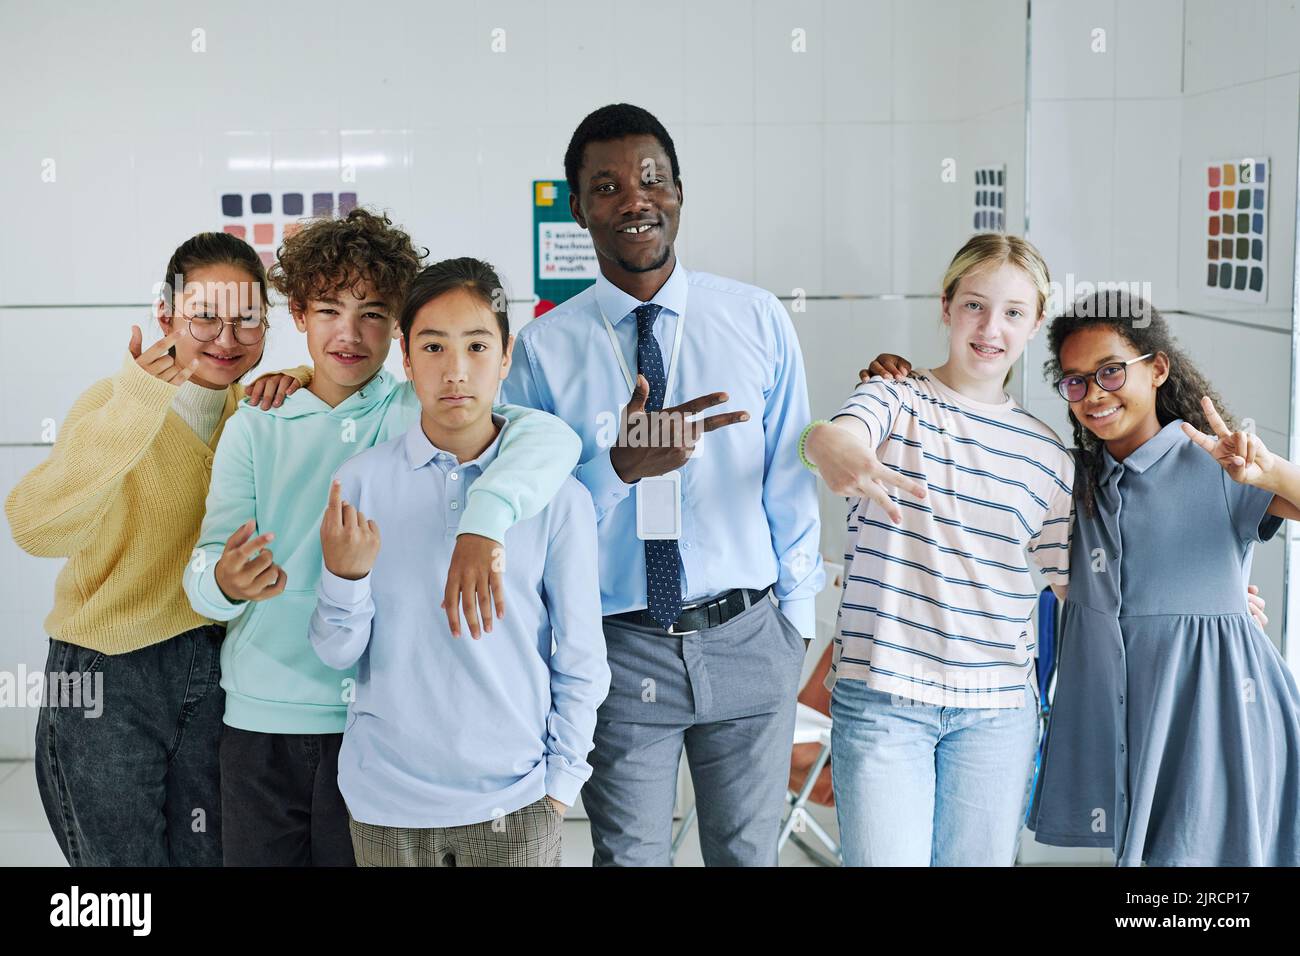 Teacher Posing With Students Stock Photo - Download Image Now - 30